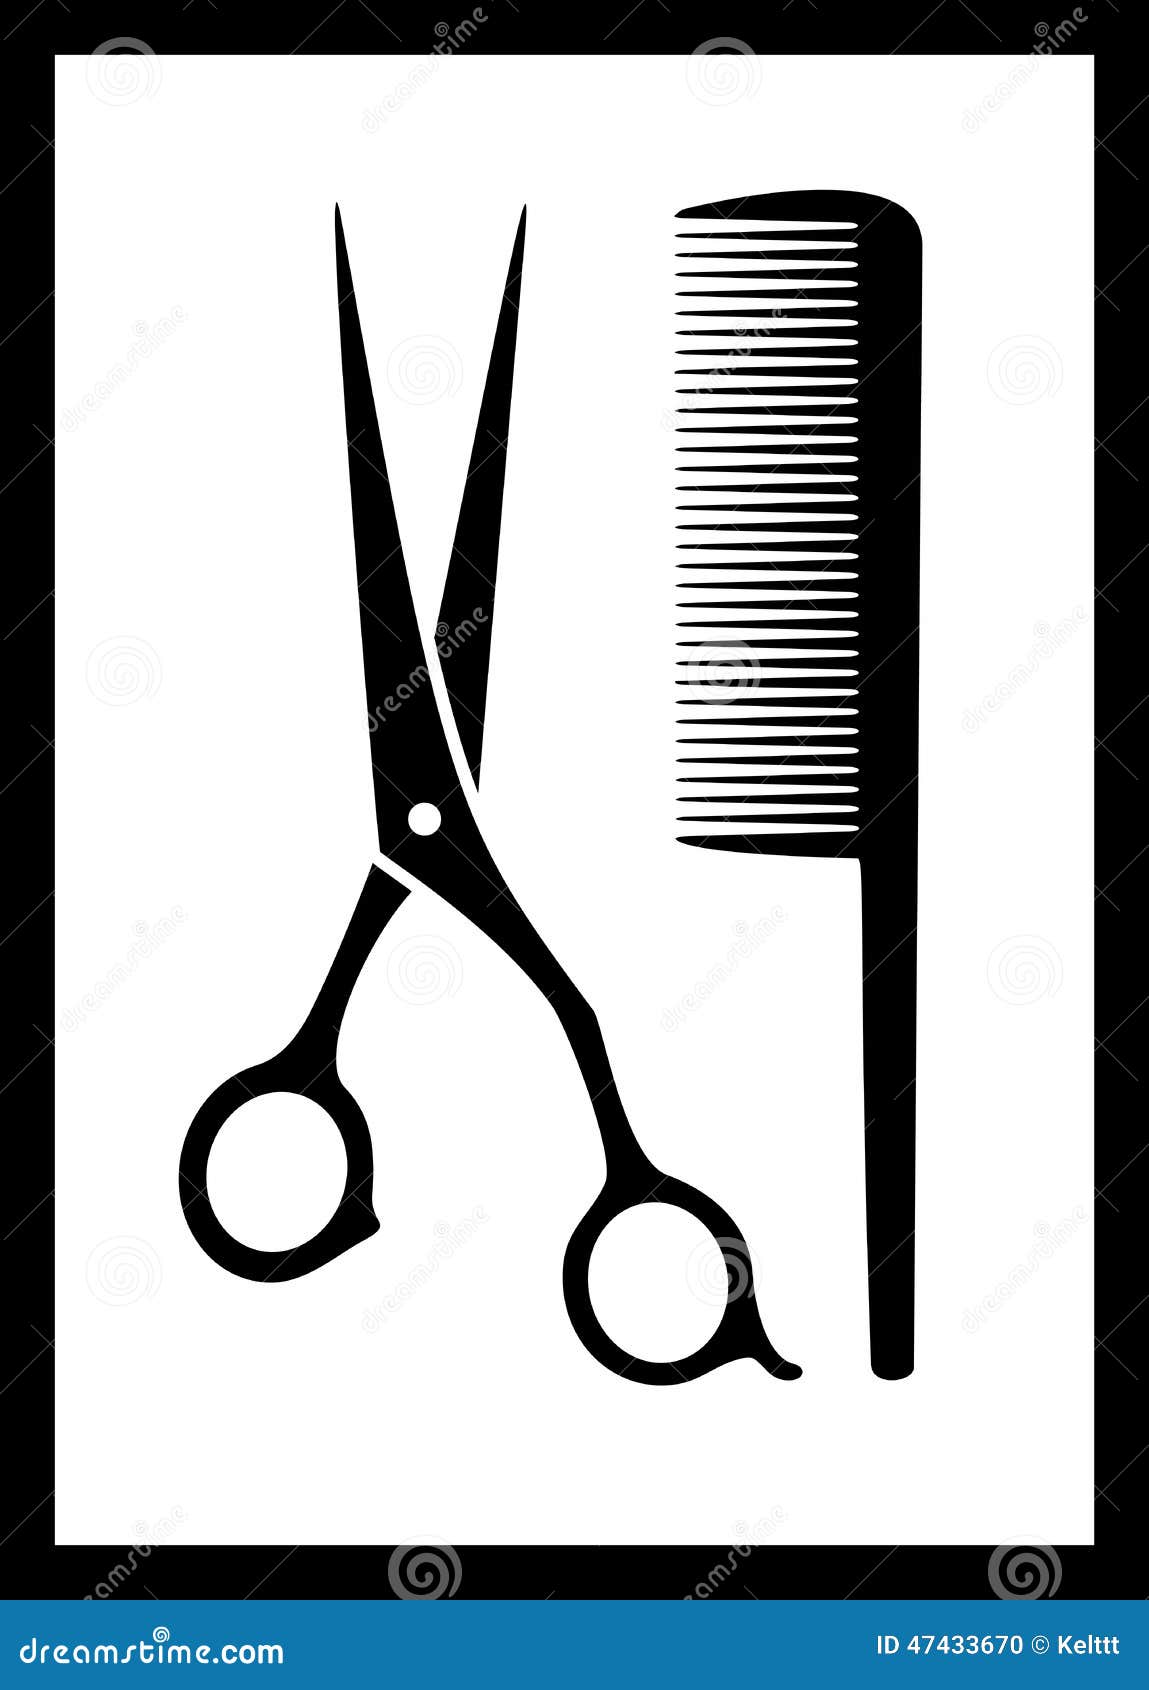 Scissors And Comb On Black Frame Stock Vector - Image: 47433670